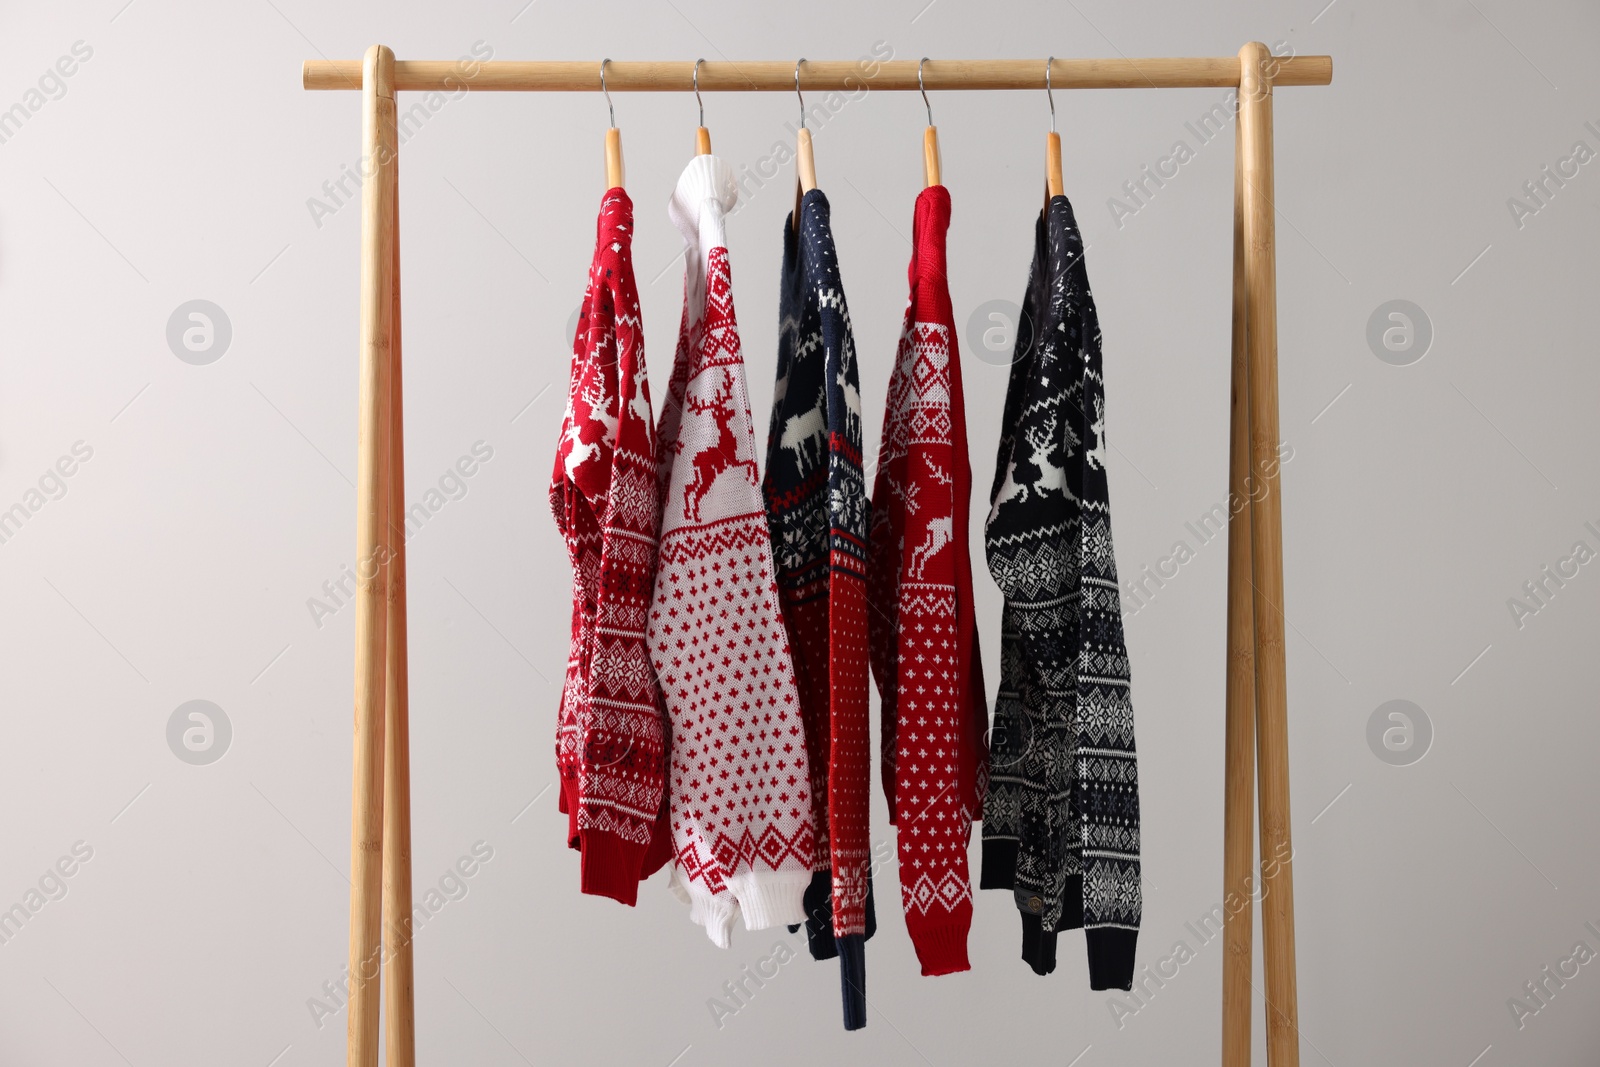 Photo of Different Christmas sweaters hanging on rack against light background